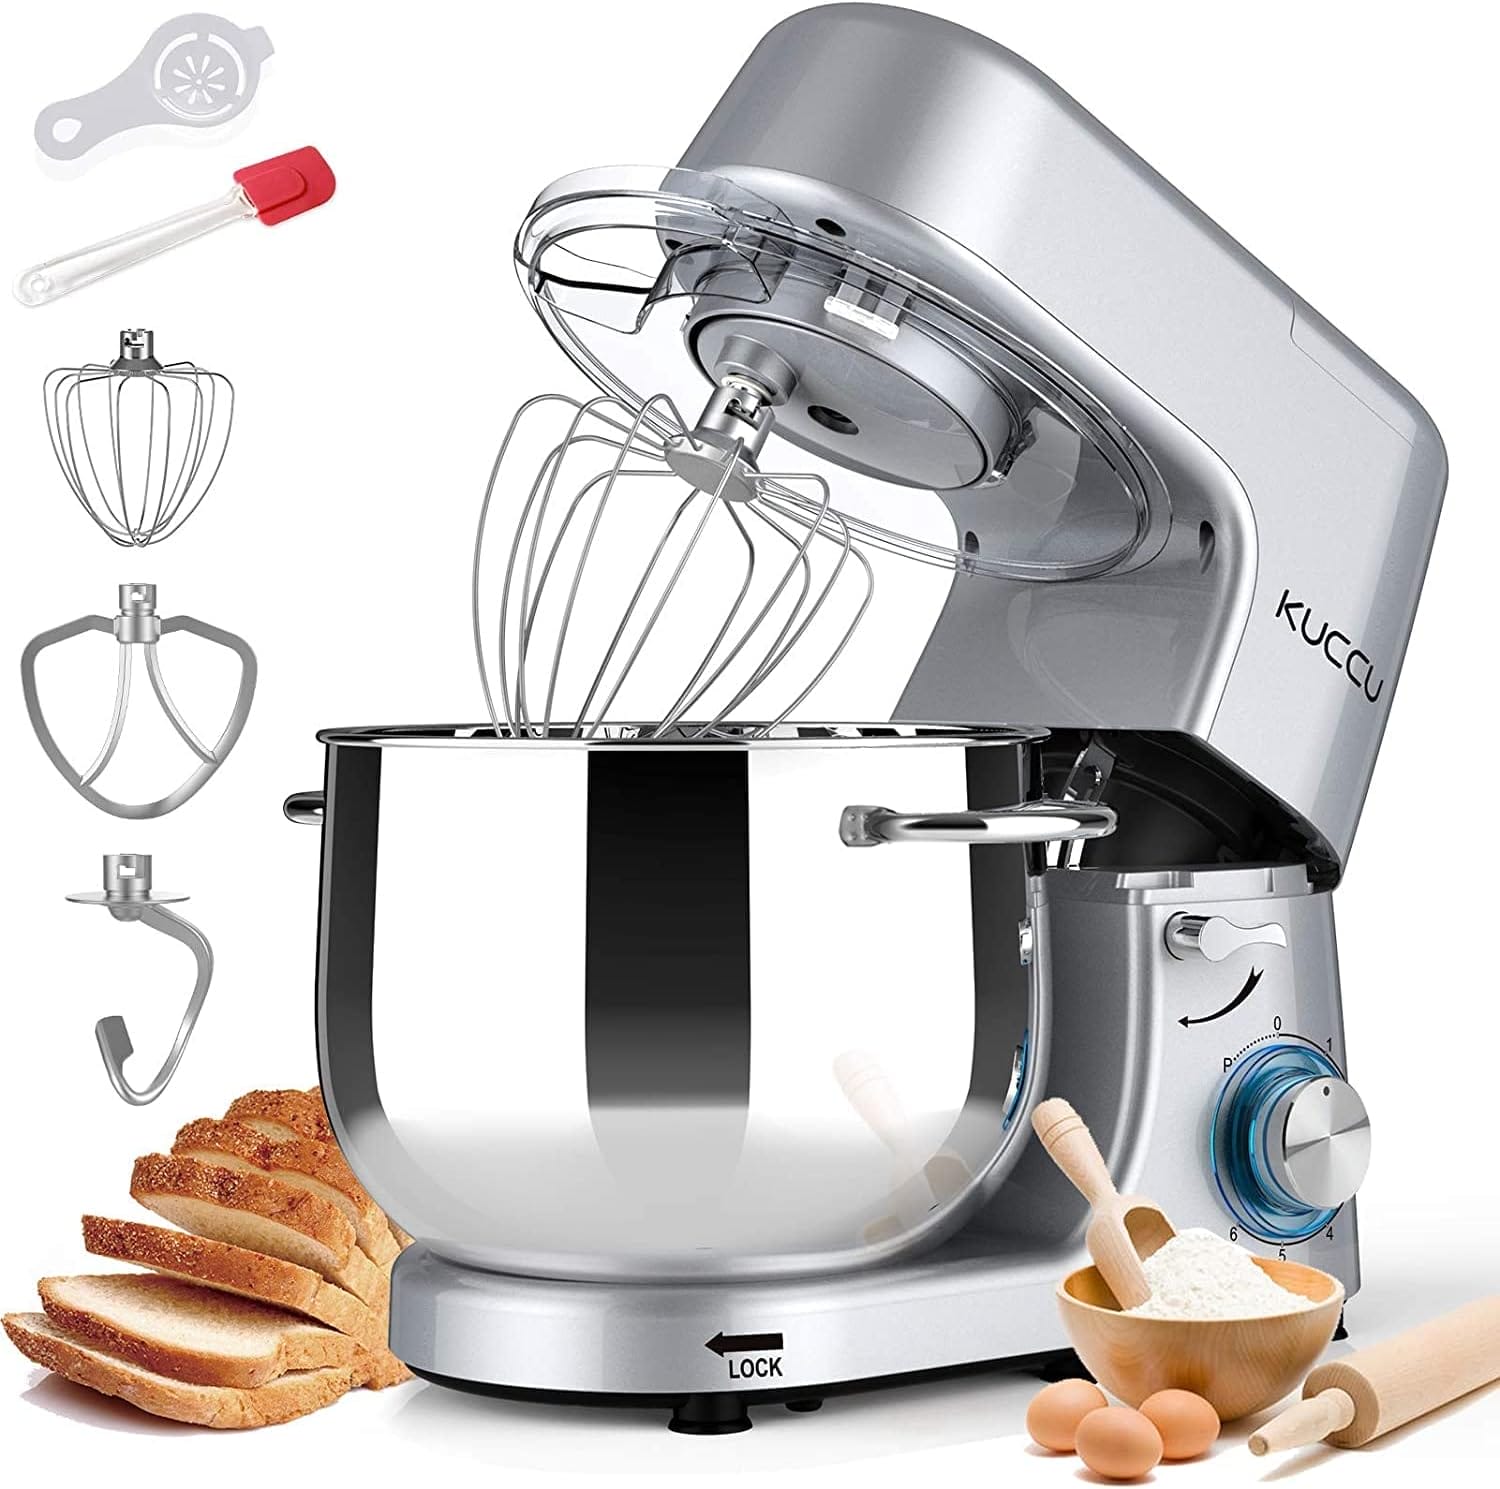 8.5 QT Double Handle KUCCU Stand Mixer, 6 Speed with Pulse Electric Kitchen Mixer, 660W Tilt-Head Food Mixer with Dishwasher-Safe Dough Hook, Flat Beater, Wire Whisk, Splash Guard for home baking (Silver)